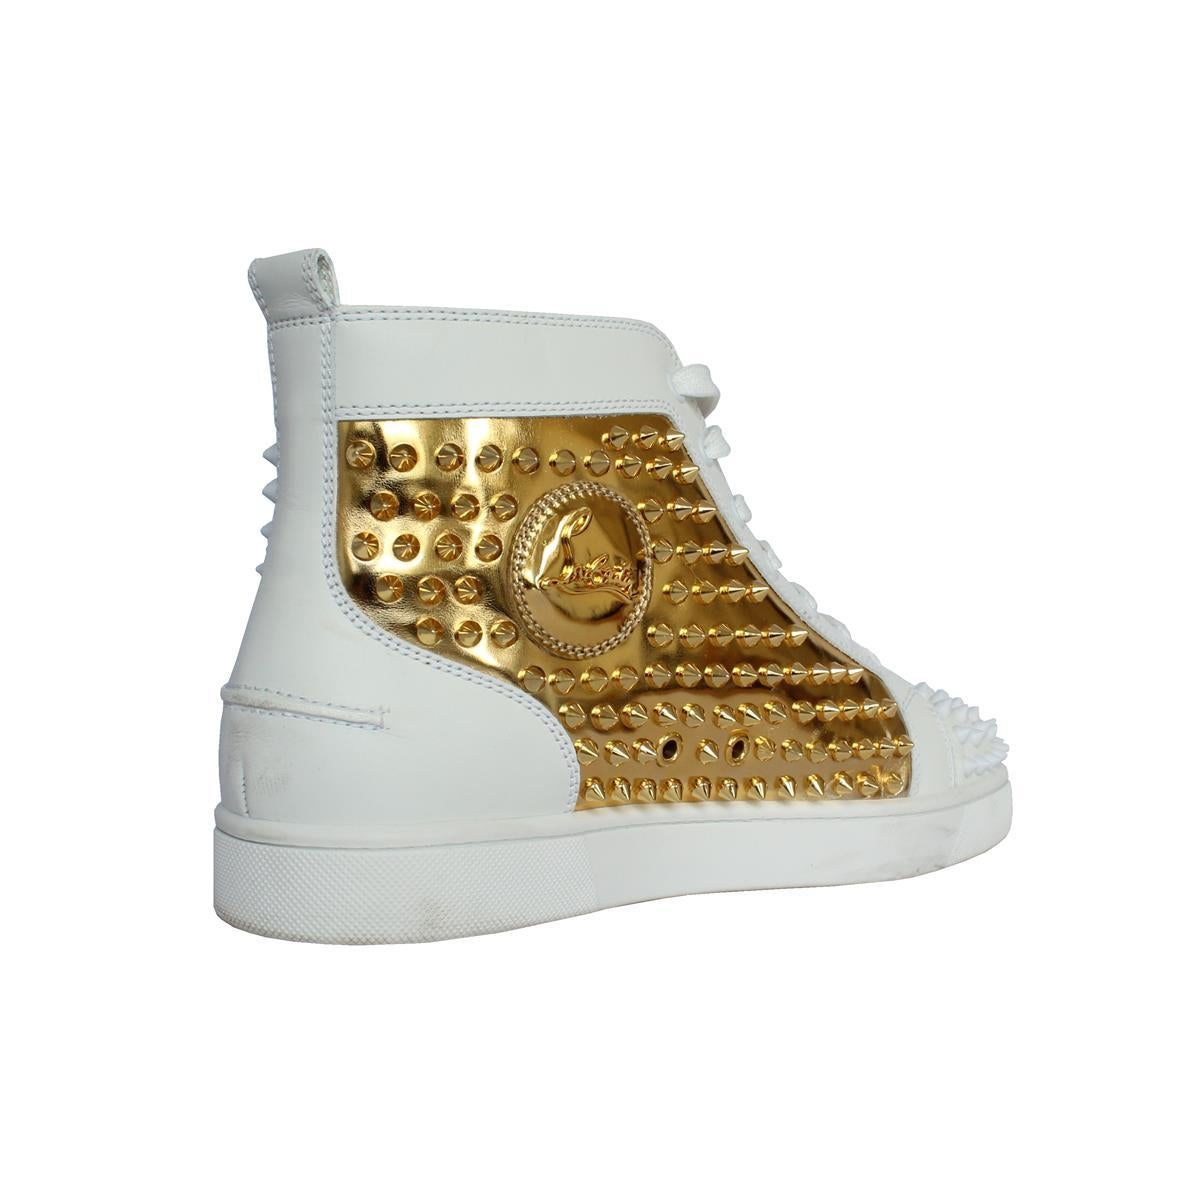 Crazy and super Louboutin's men sneakers
Leather 
White and gold color
Completely adorned with studs
Laced
Red sole
Worldwide express shipping included in the price !